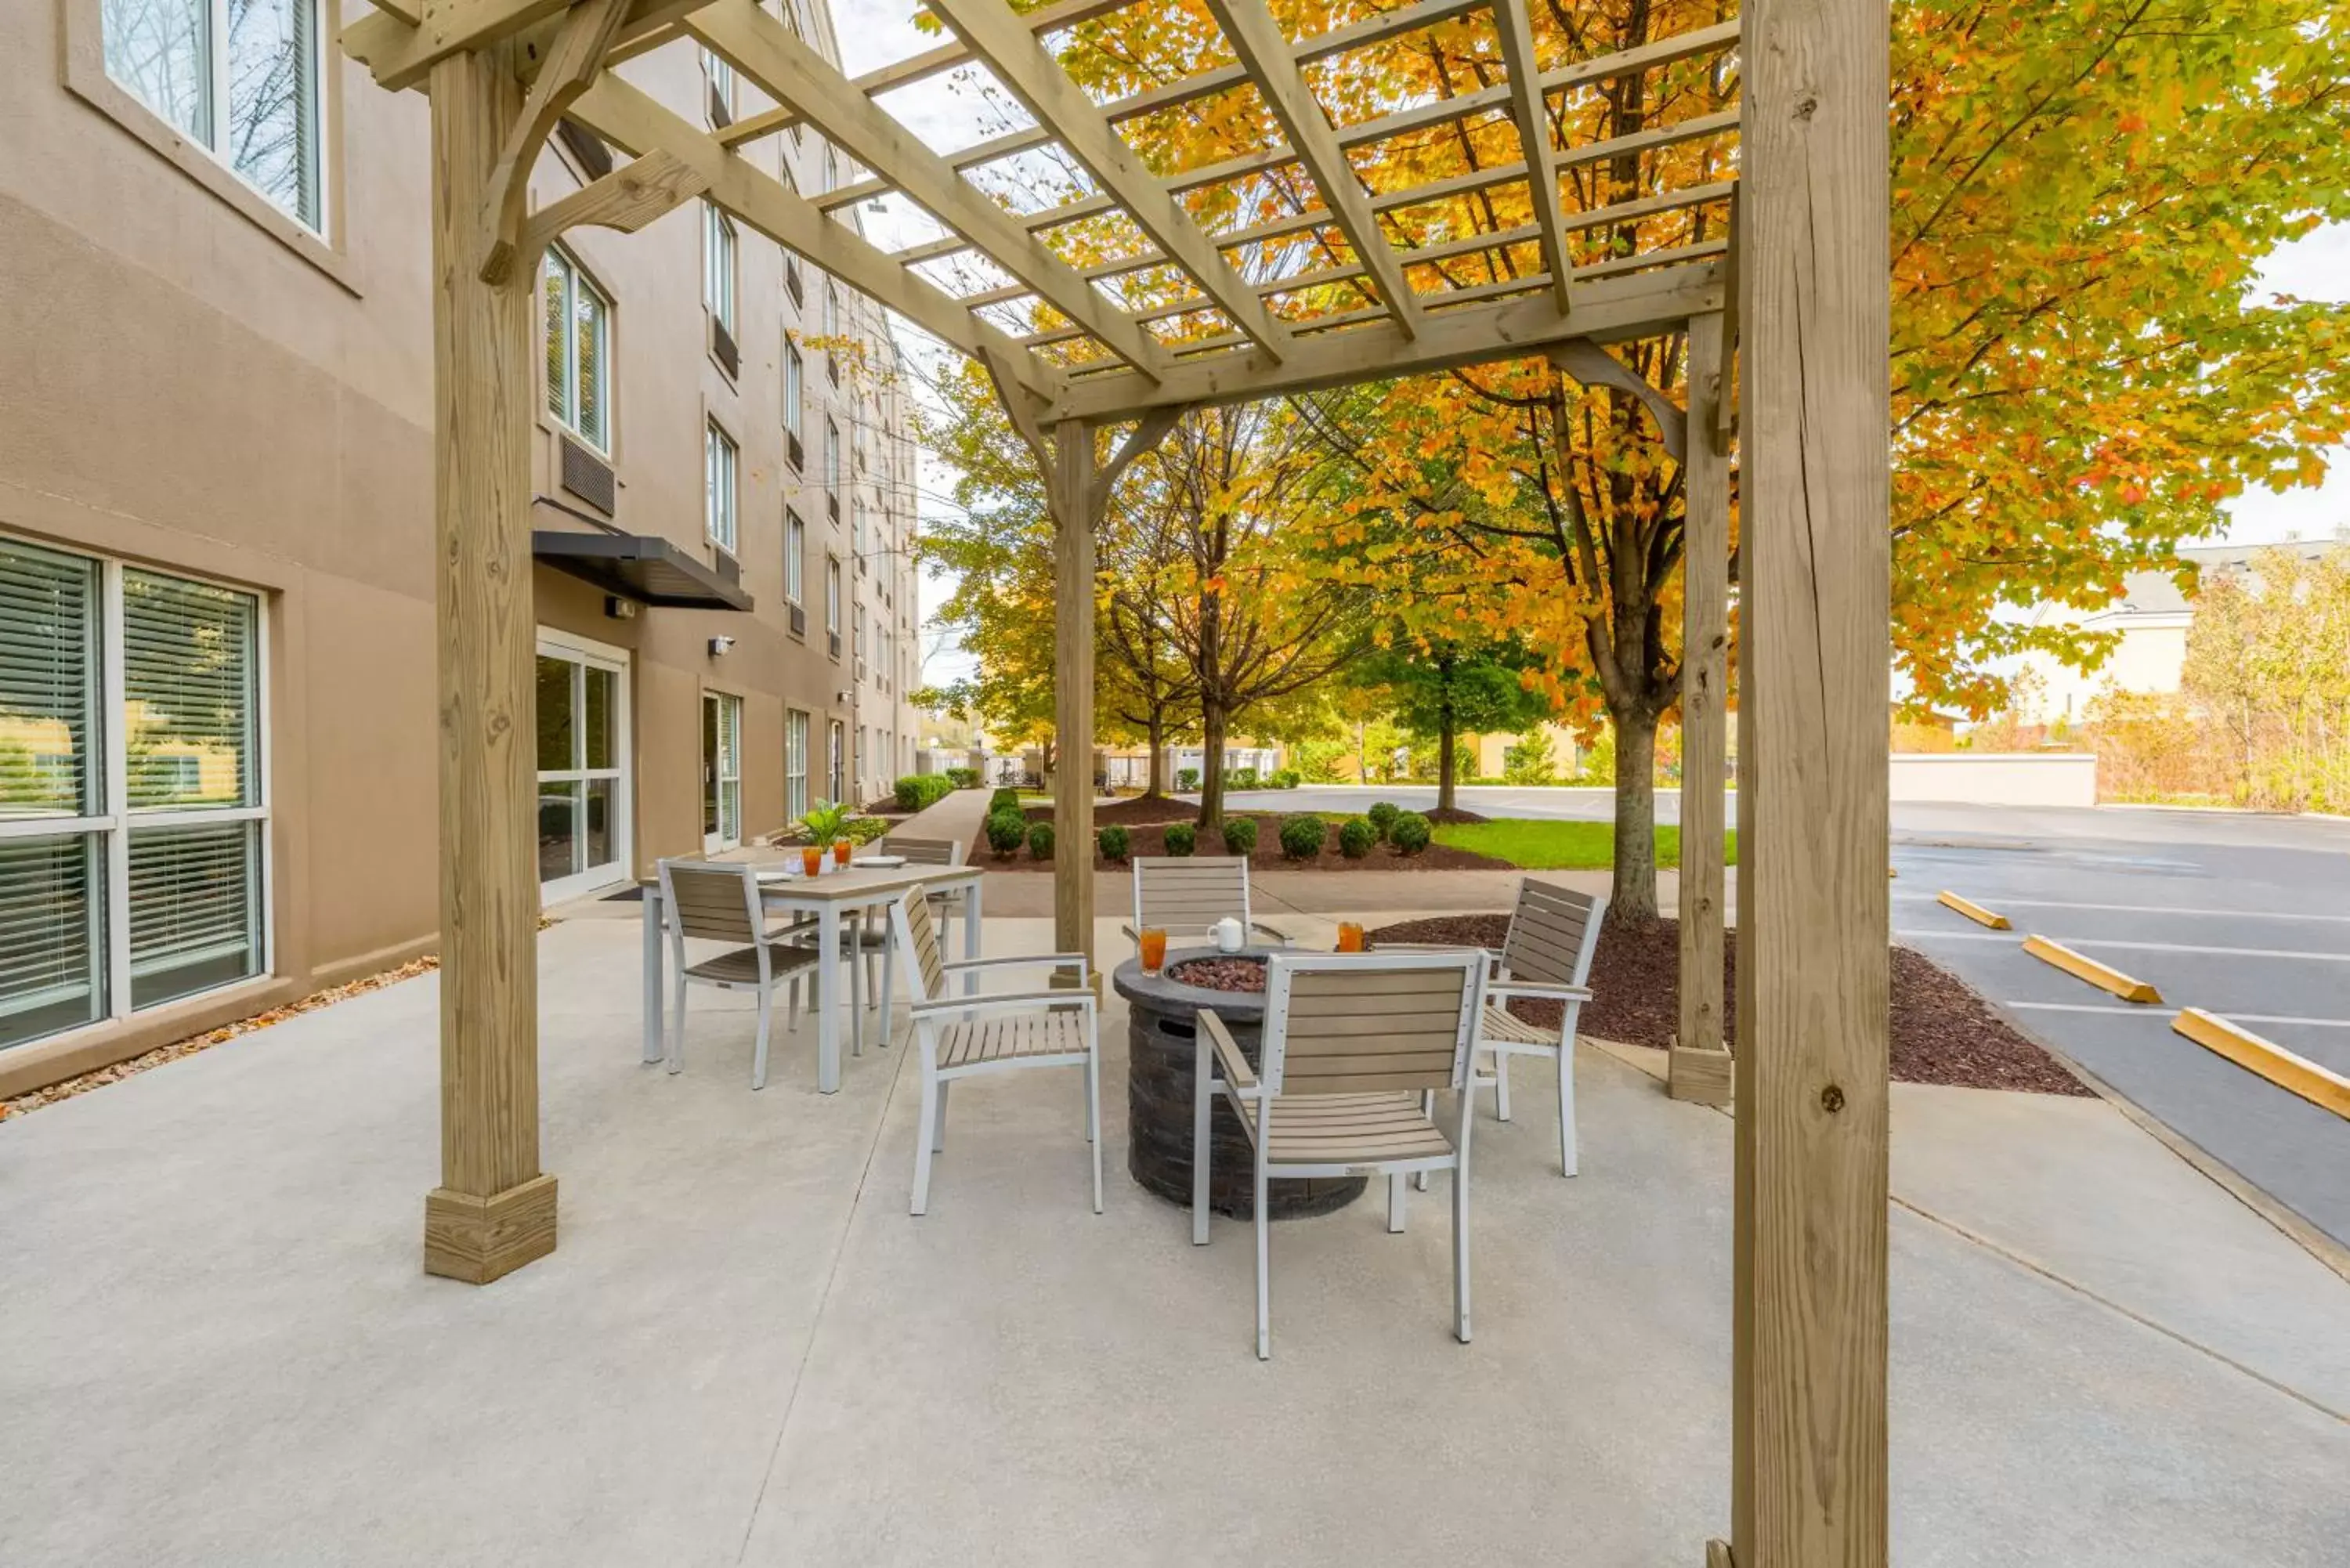 Patio in Country Inn & Suites by Radisson, Cookeville, TN